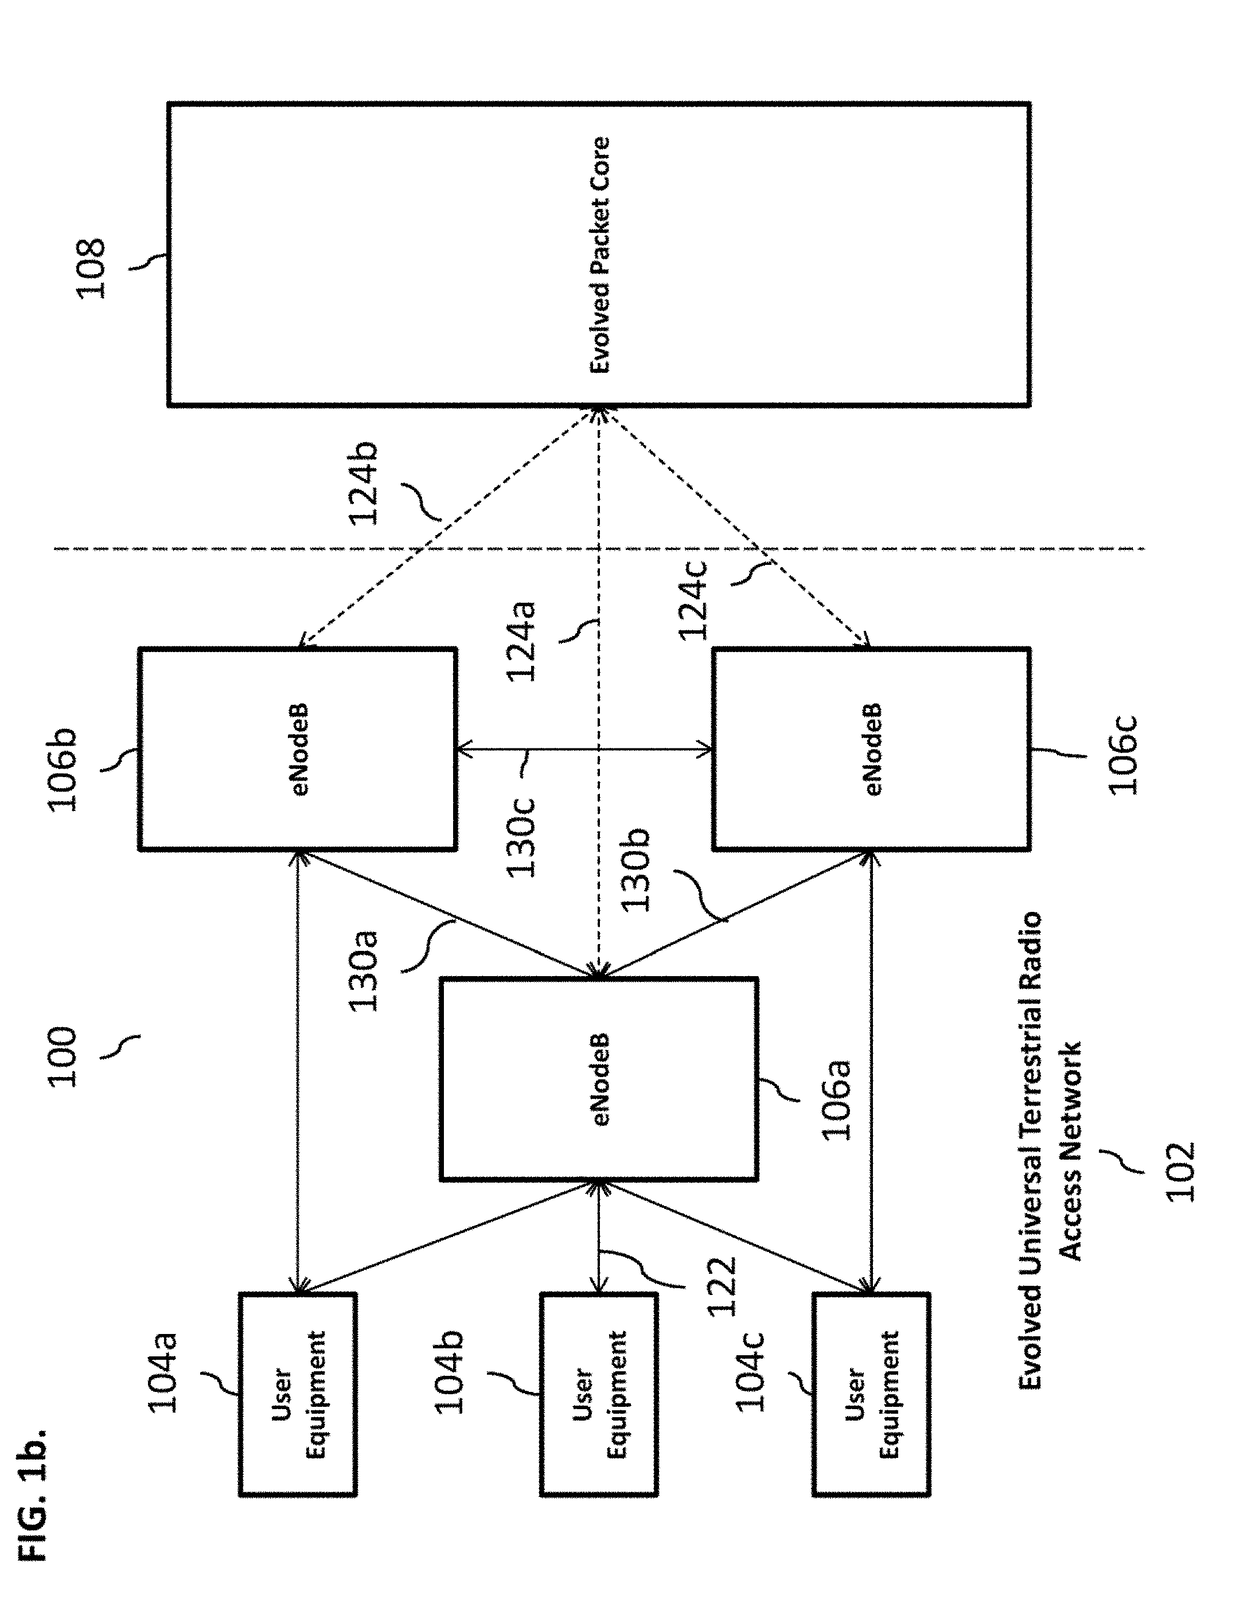 Multi-site MIMO communications system with hybrid beamforming in l1-split architecture